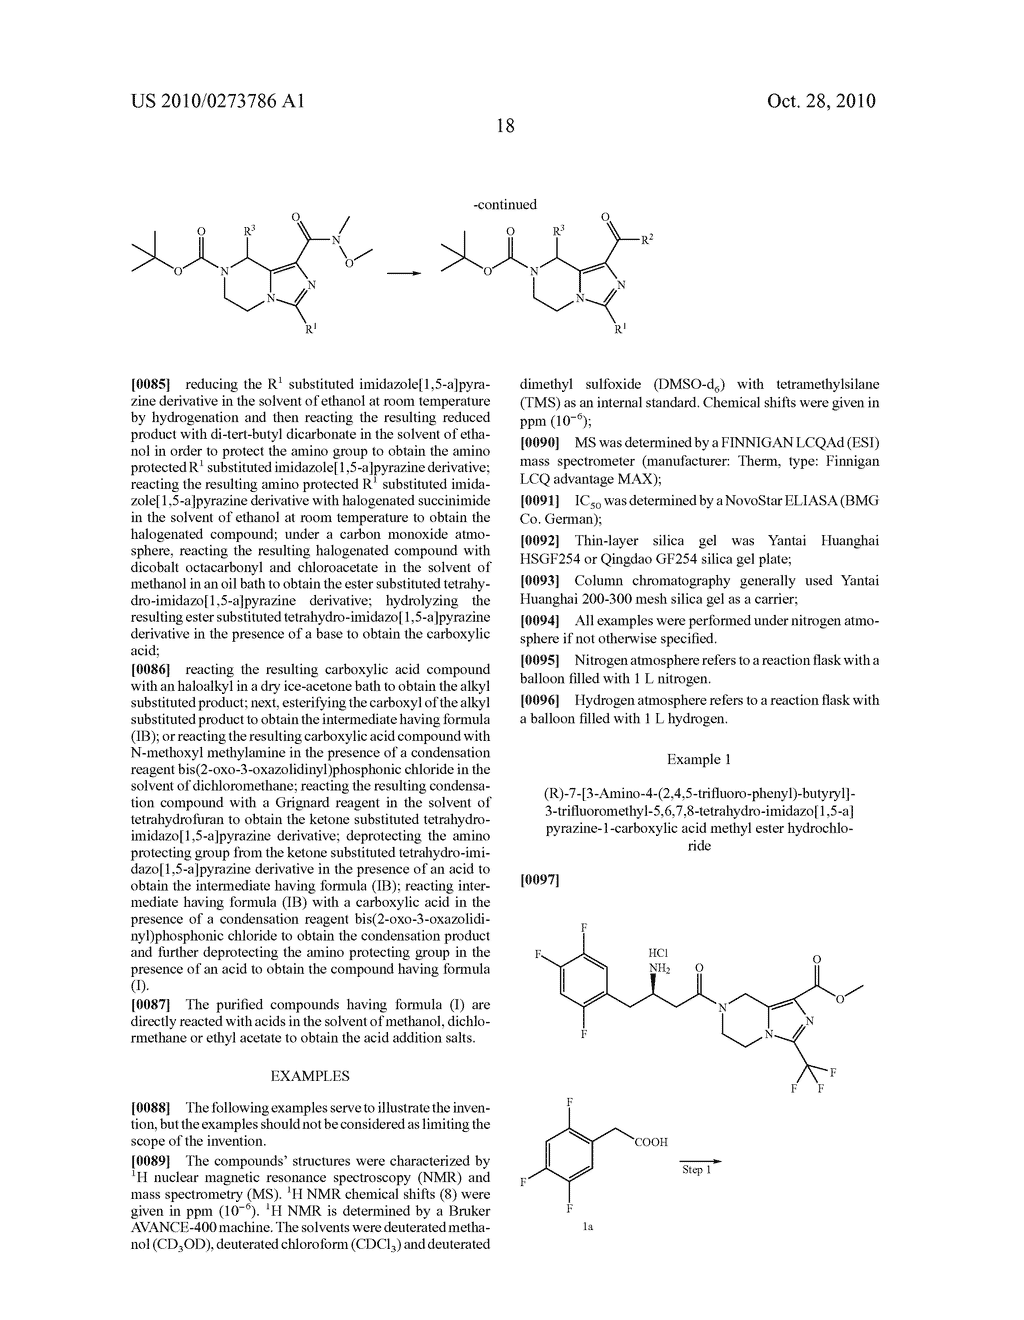 TETRAHYDRO-IMIDAZ0[1,5-A]PYRAZINE DERIVATIVES, PREPARATION PROCESS AND MEDICINAL USE THEREOF - diagram, schematic, and image 19